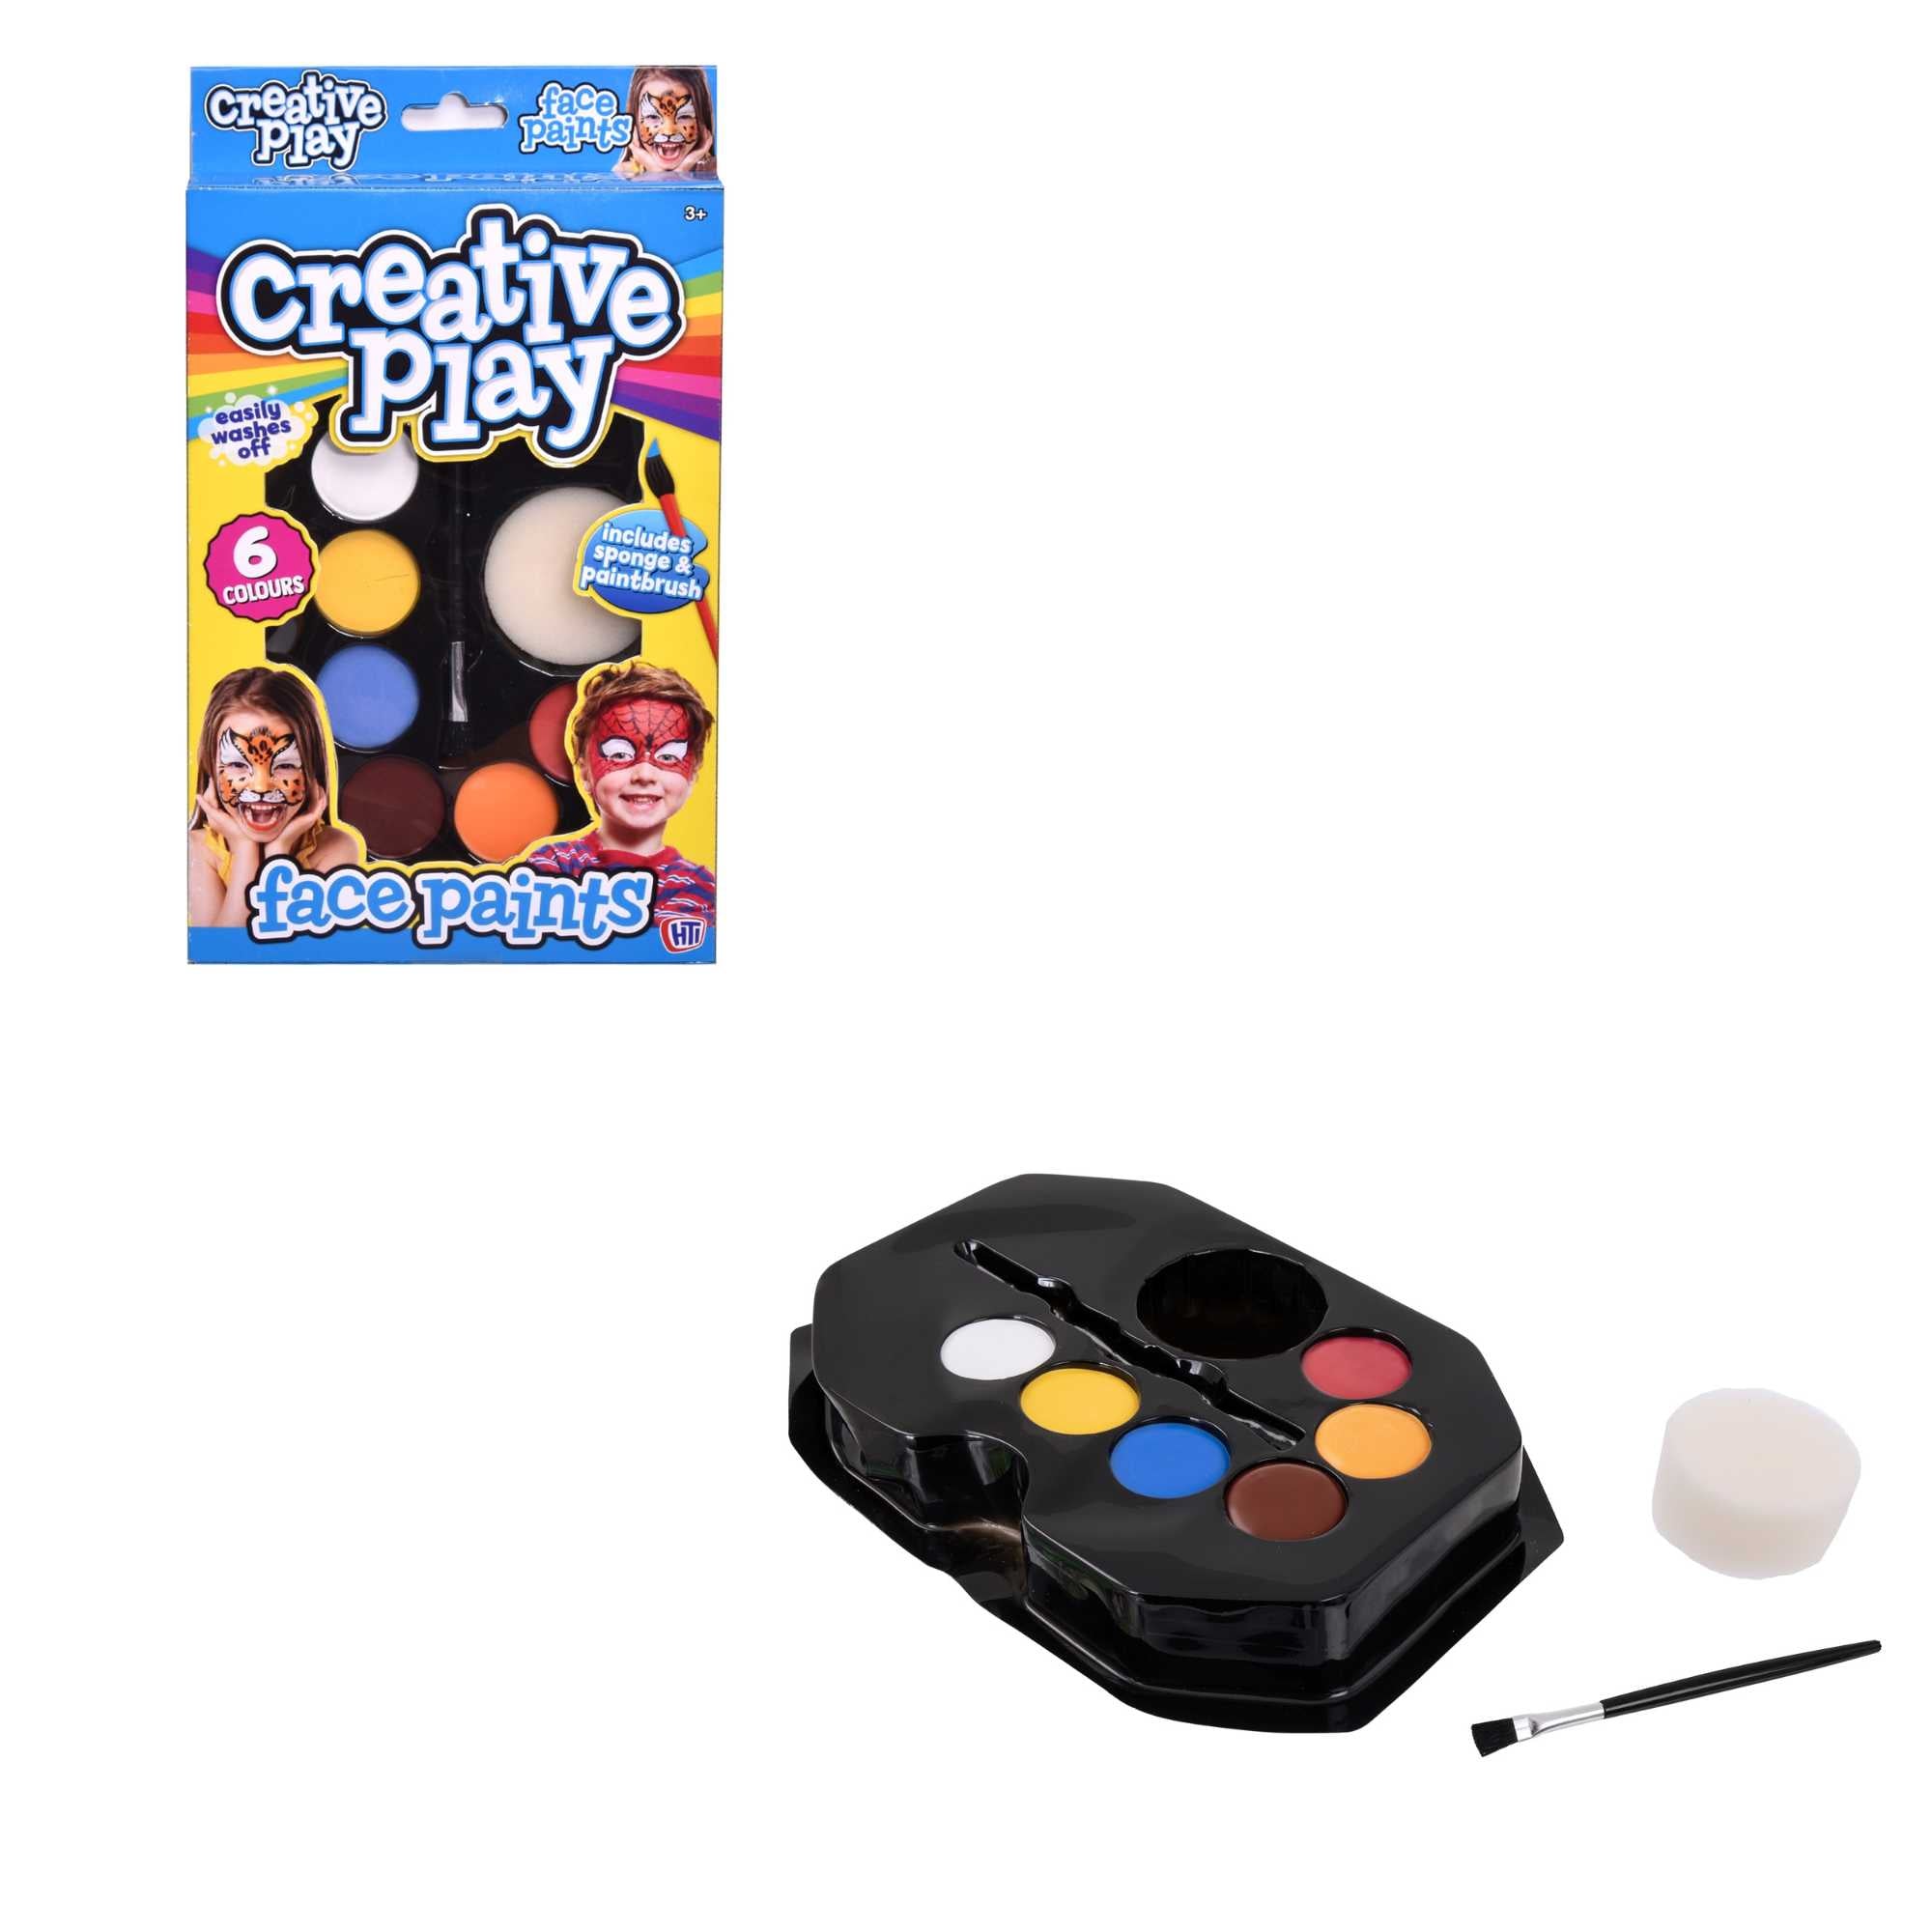 Creative Play Face Paint Set featuring a variety of vibrant, non-toxic colors, perfect for imaginative face painting and fun for all ages